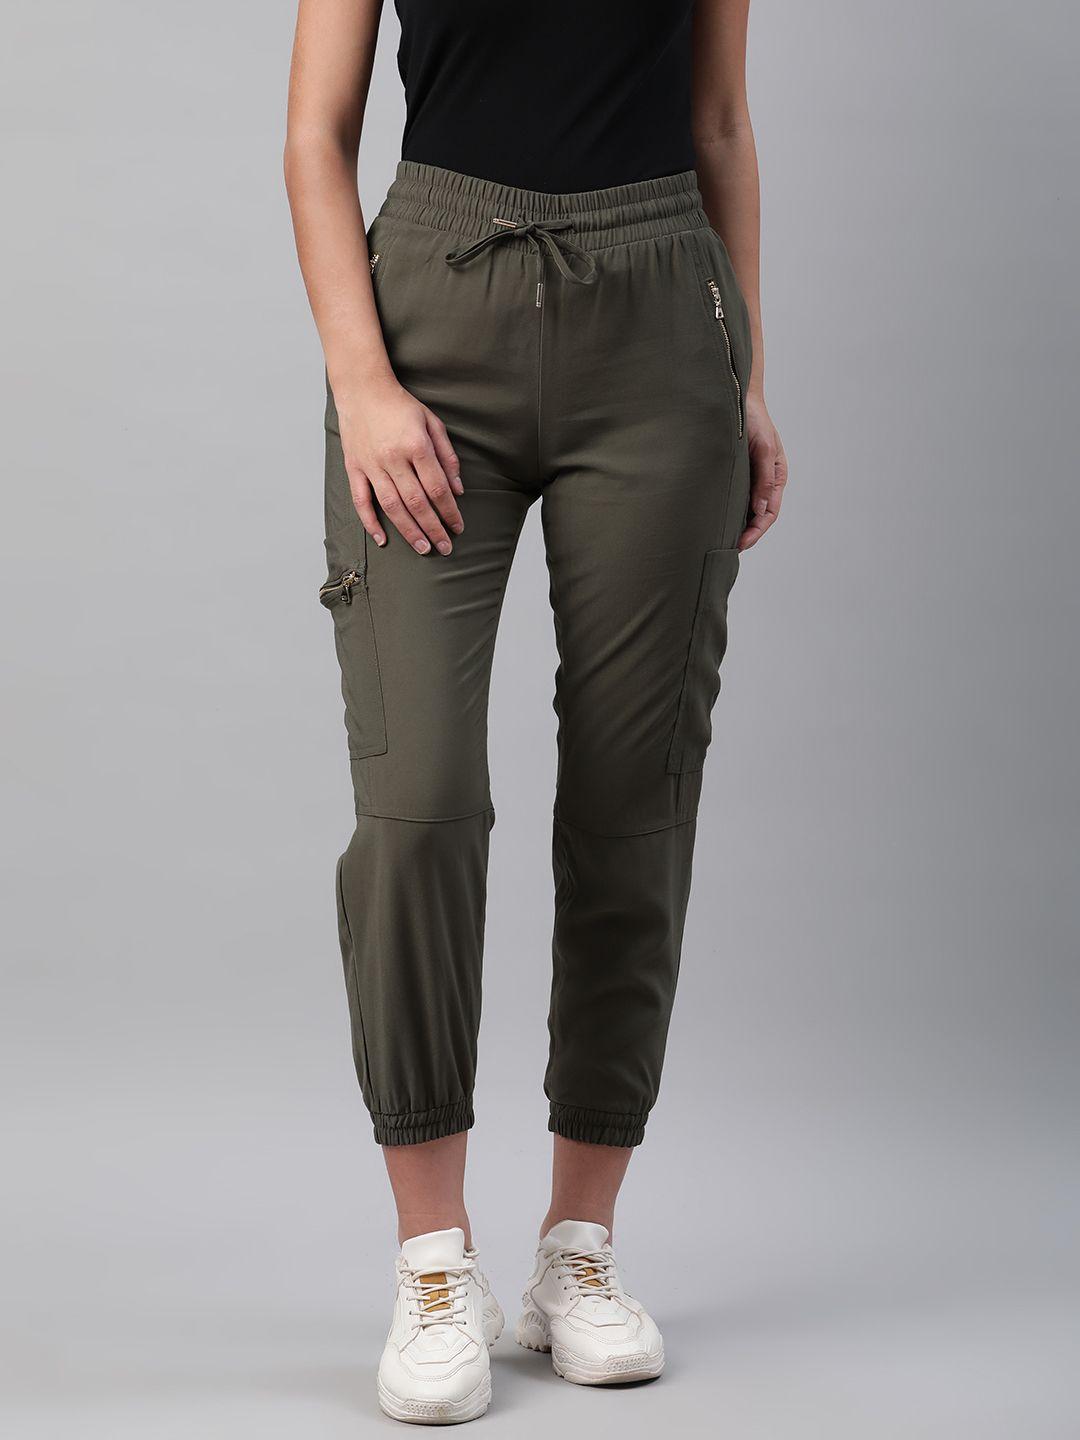 marks & spencer women olive green tapered fit solid cropped joggers